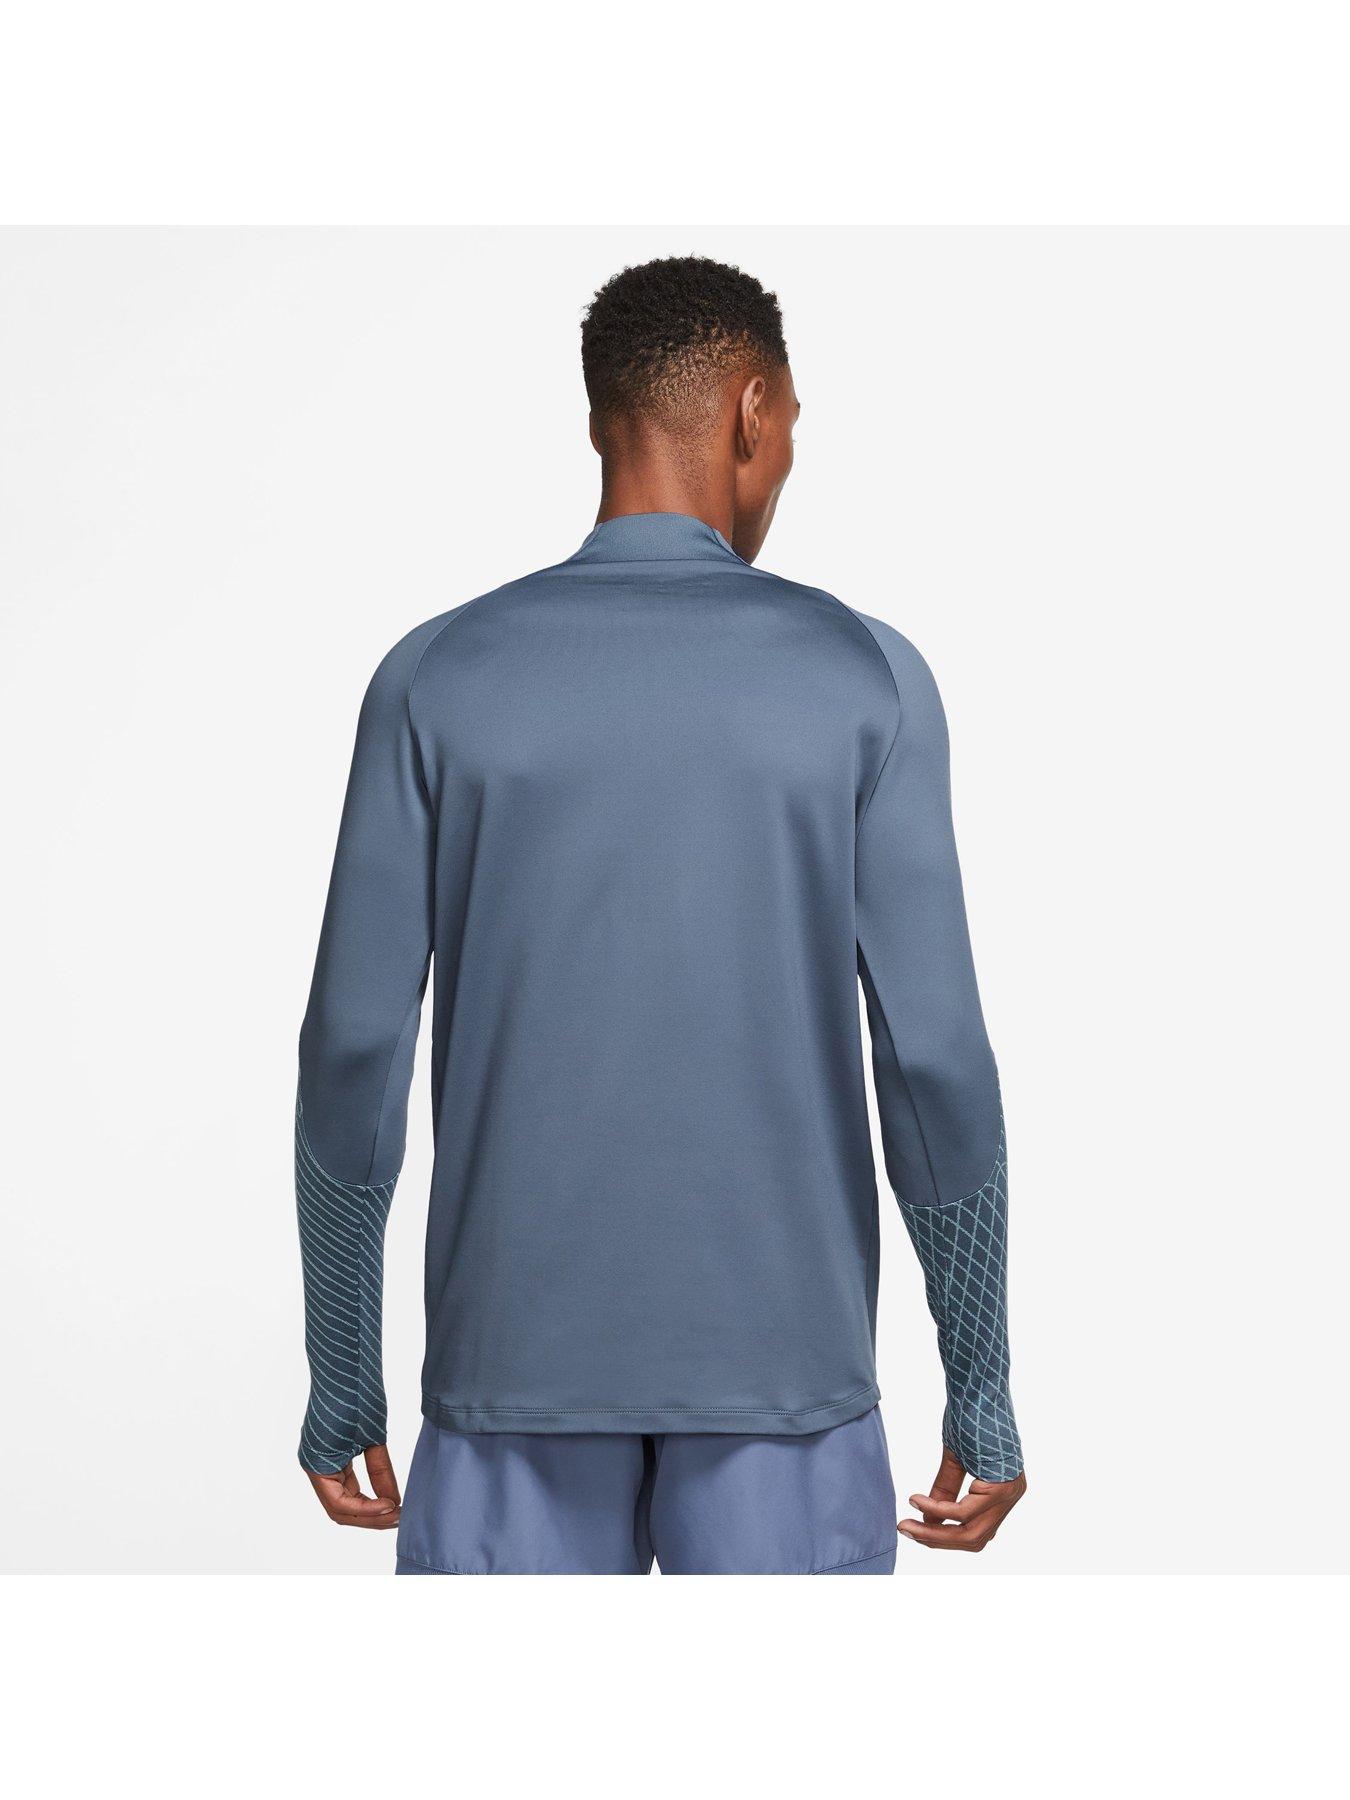 Mens Academy Dry Fit Drill Top - Blue